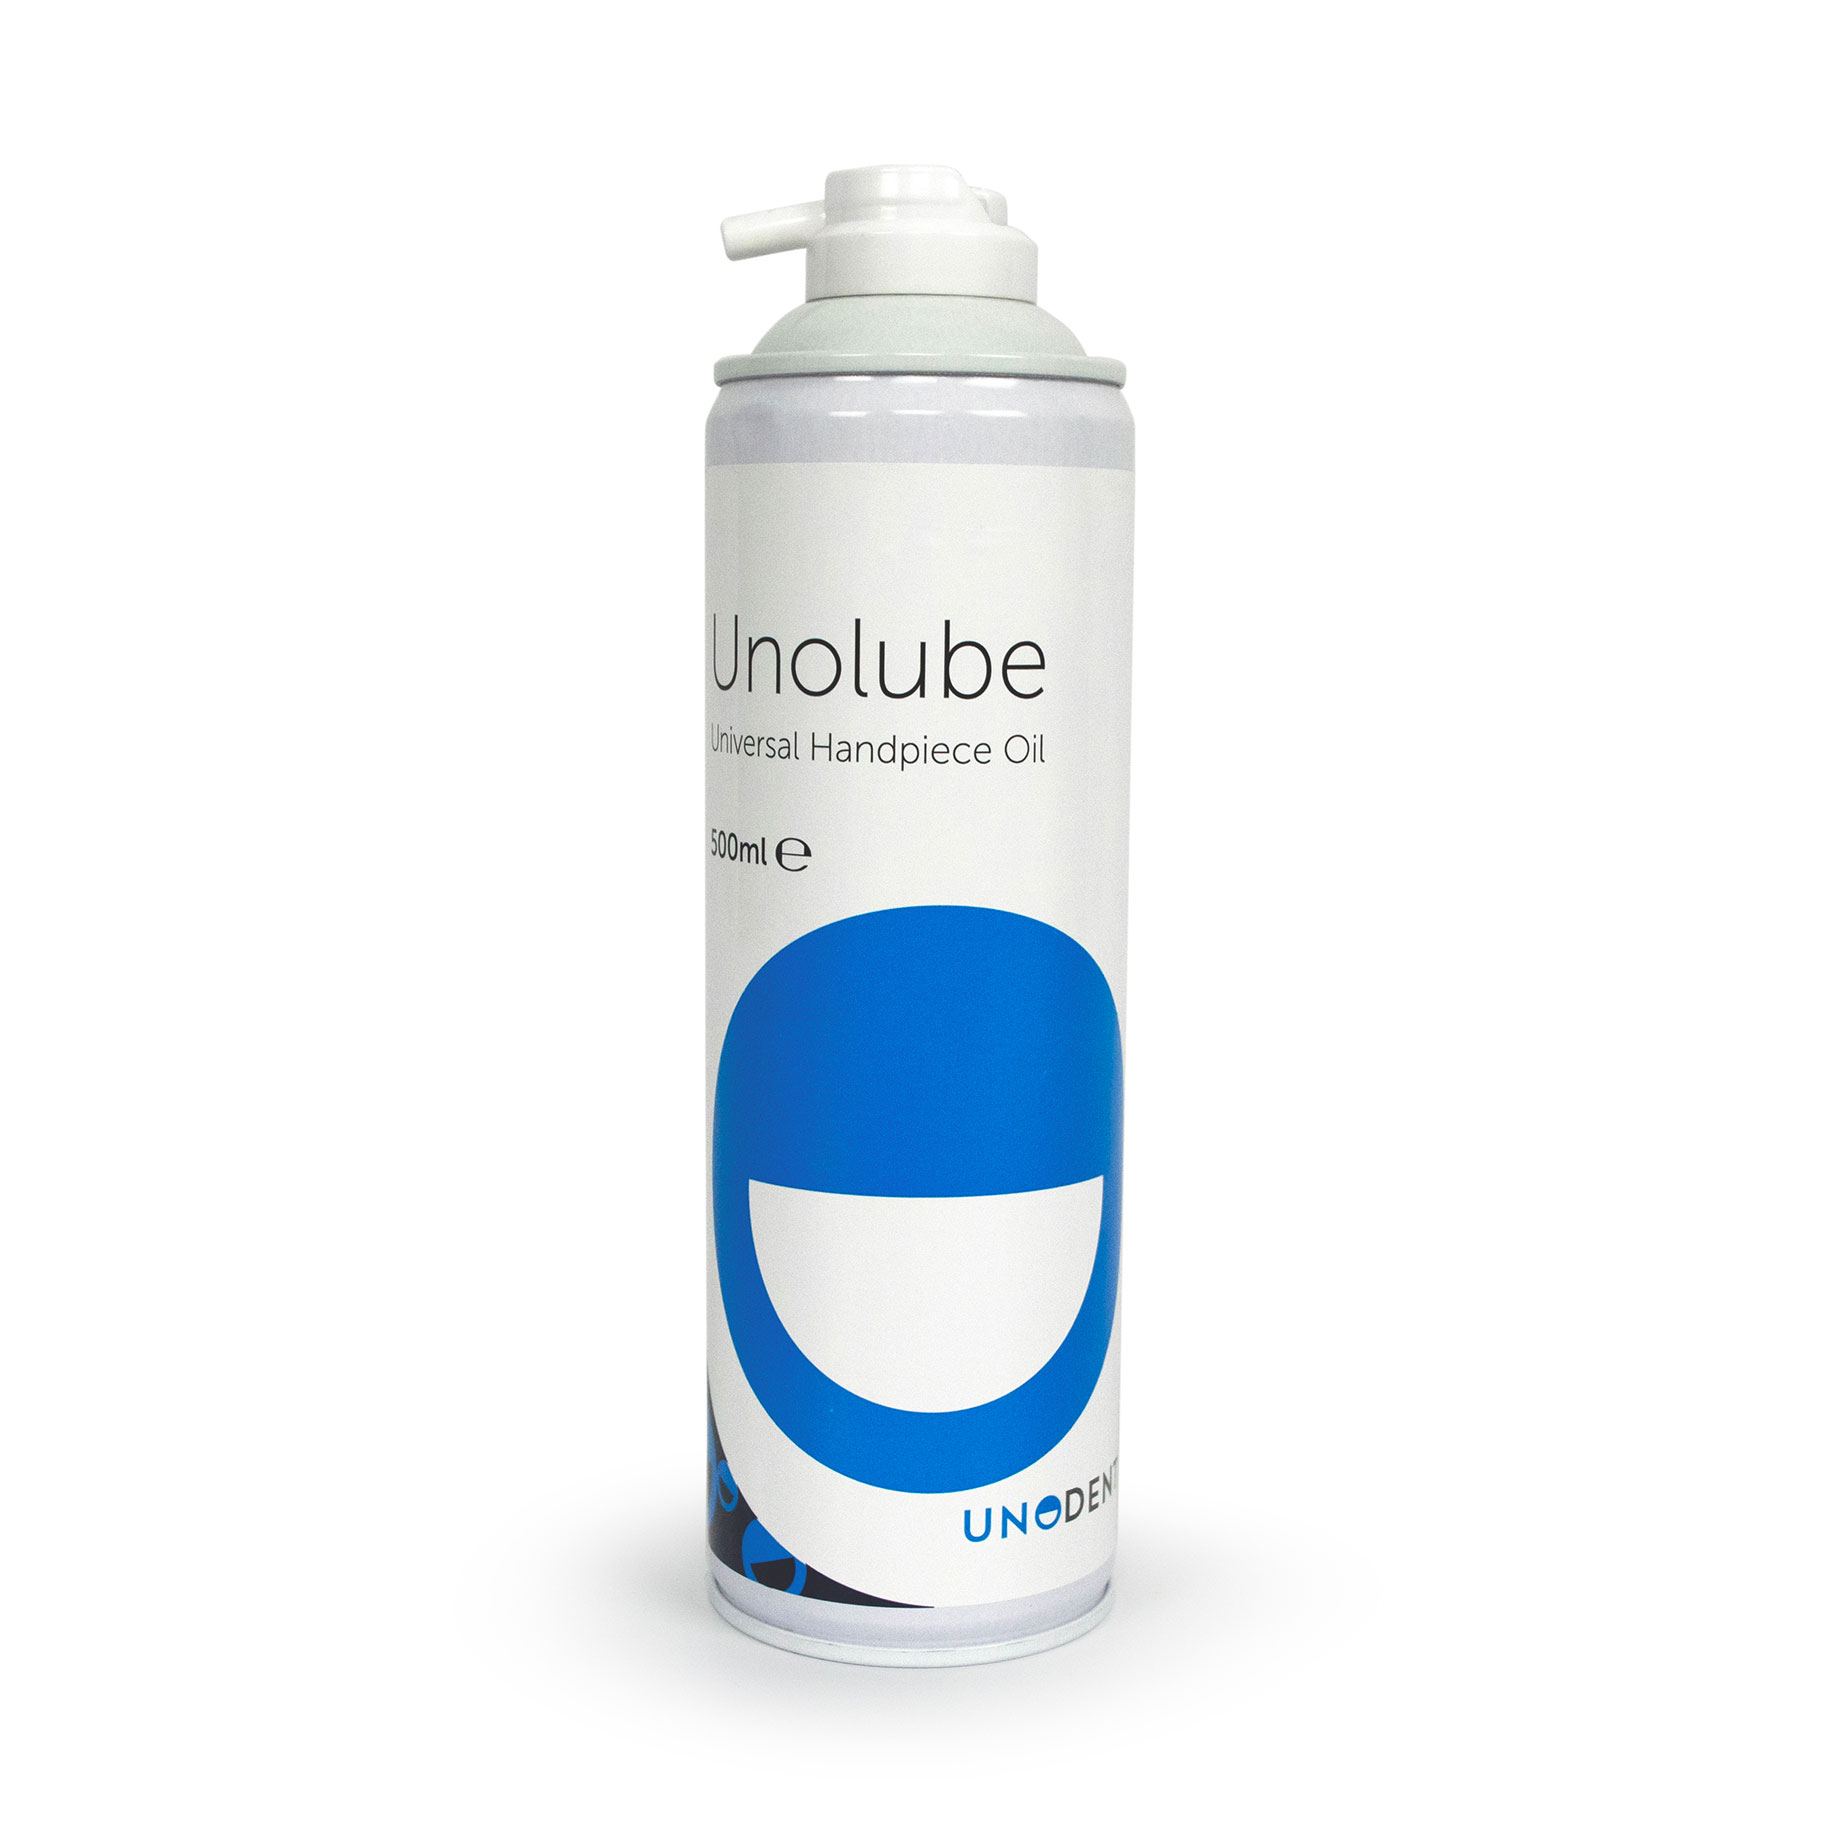 Unolube Refill Only - No Nozzle 